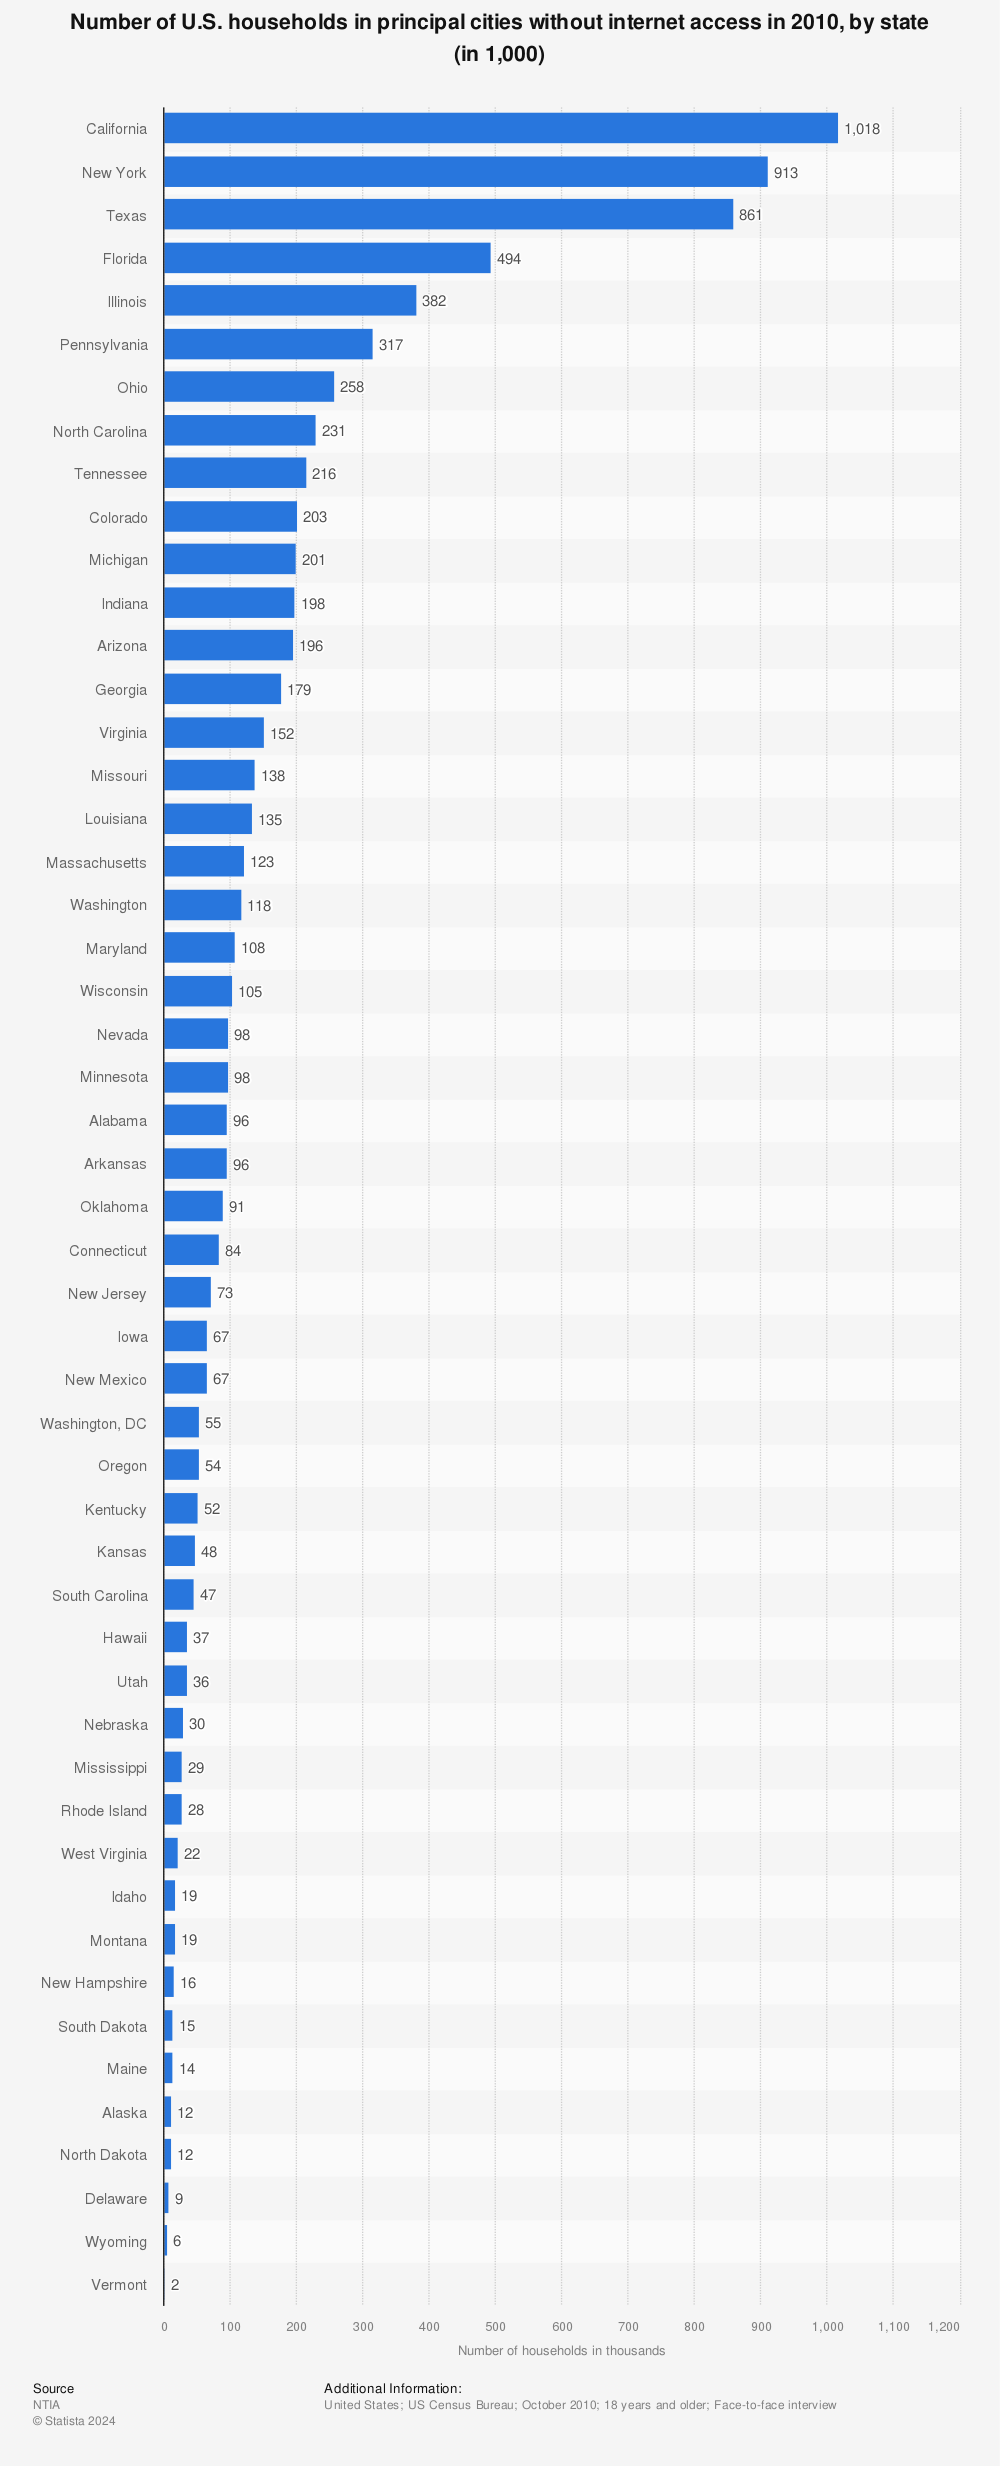 Statistic: Number of U.S. households in principal cities without internet access in 2010, by state (in 1,000) | Statista